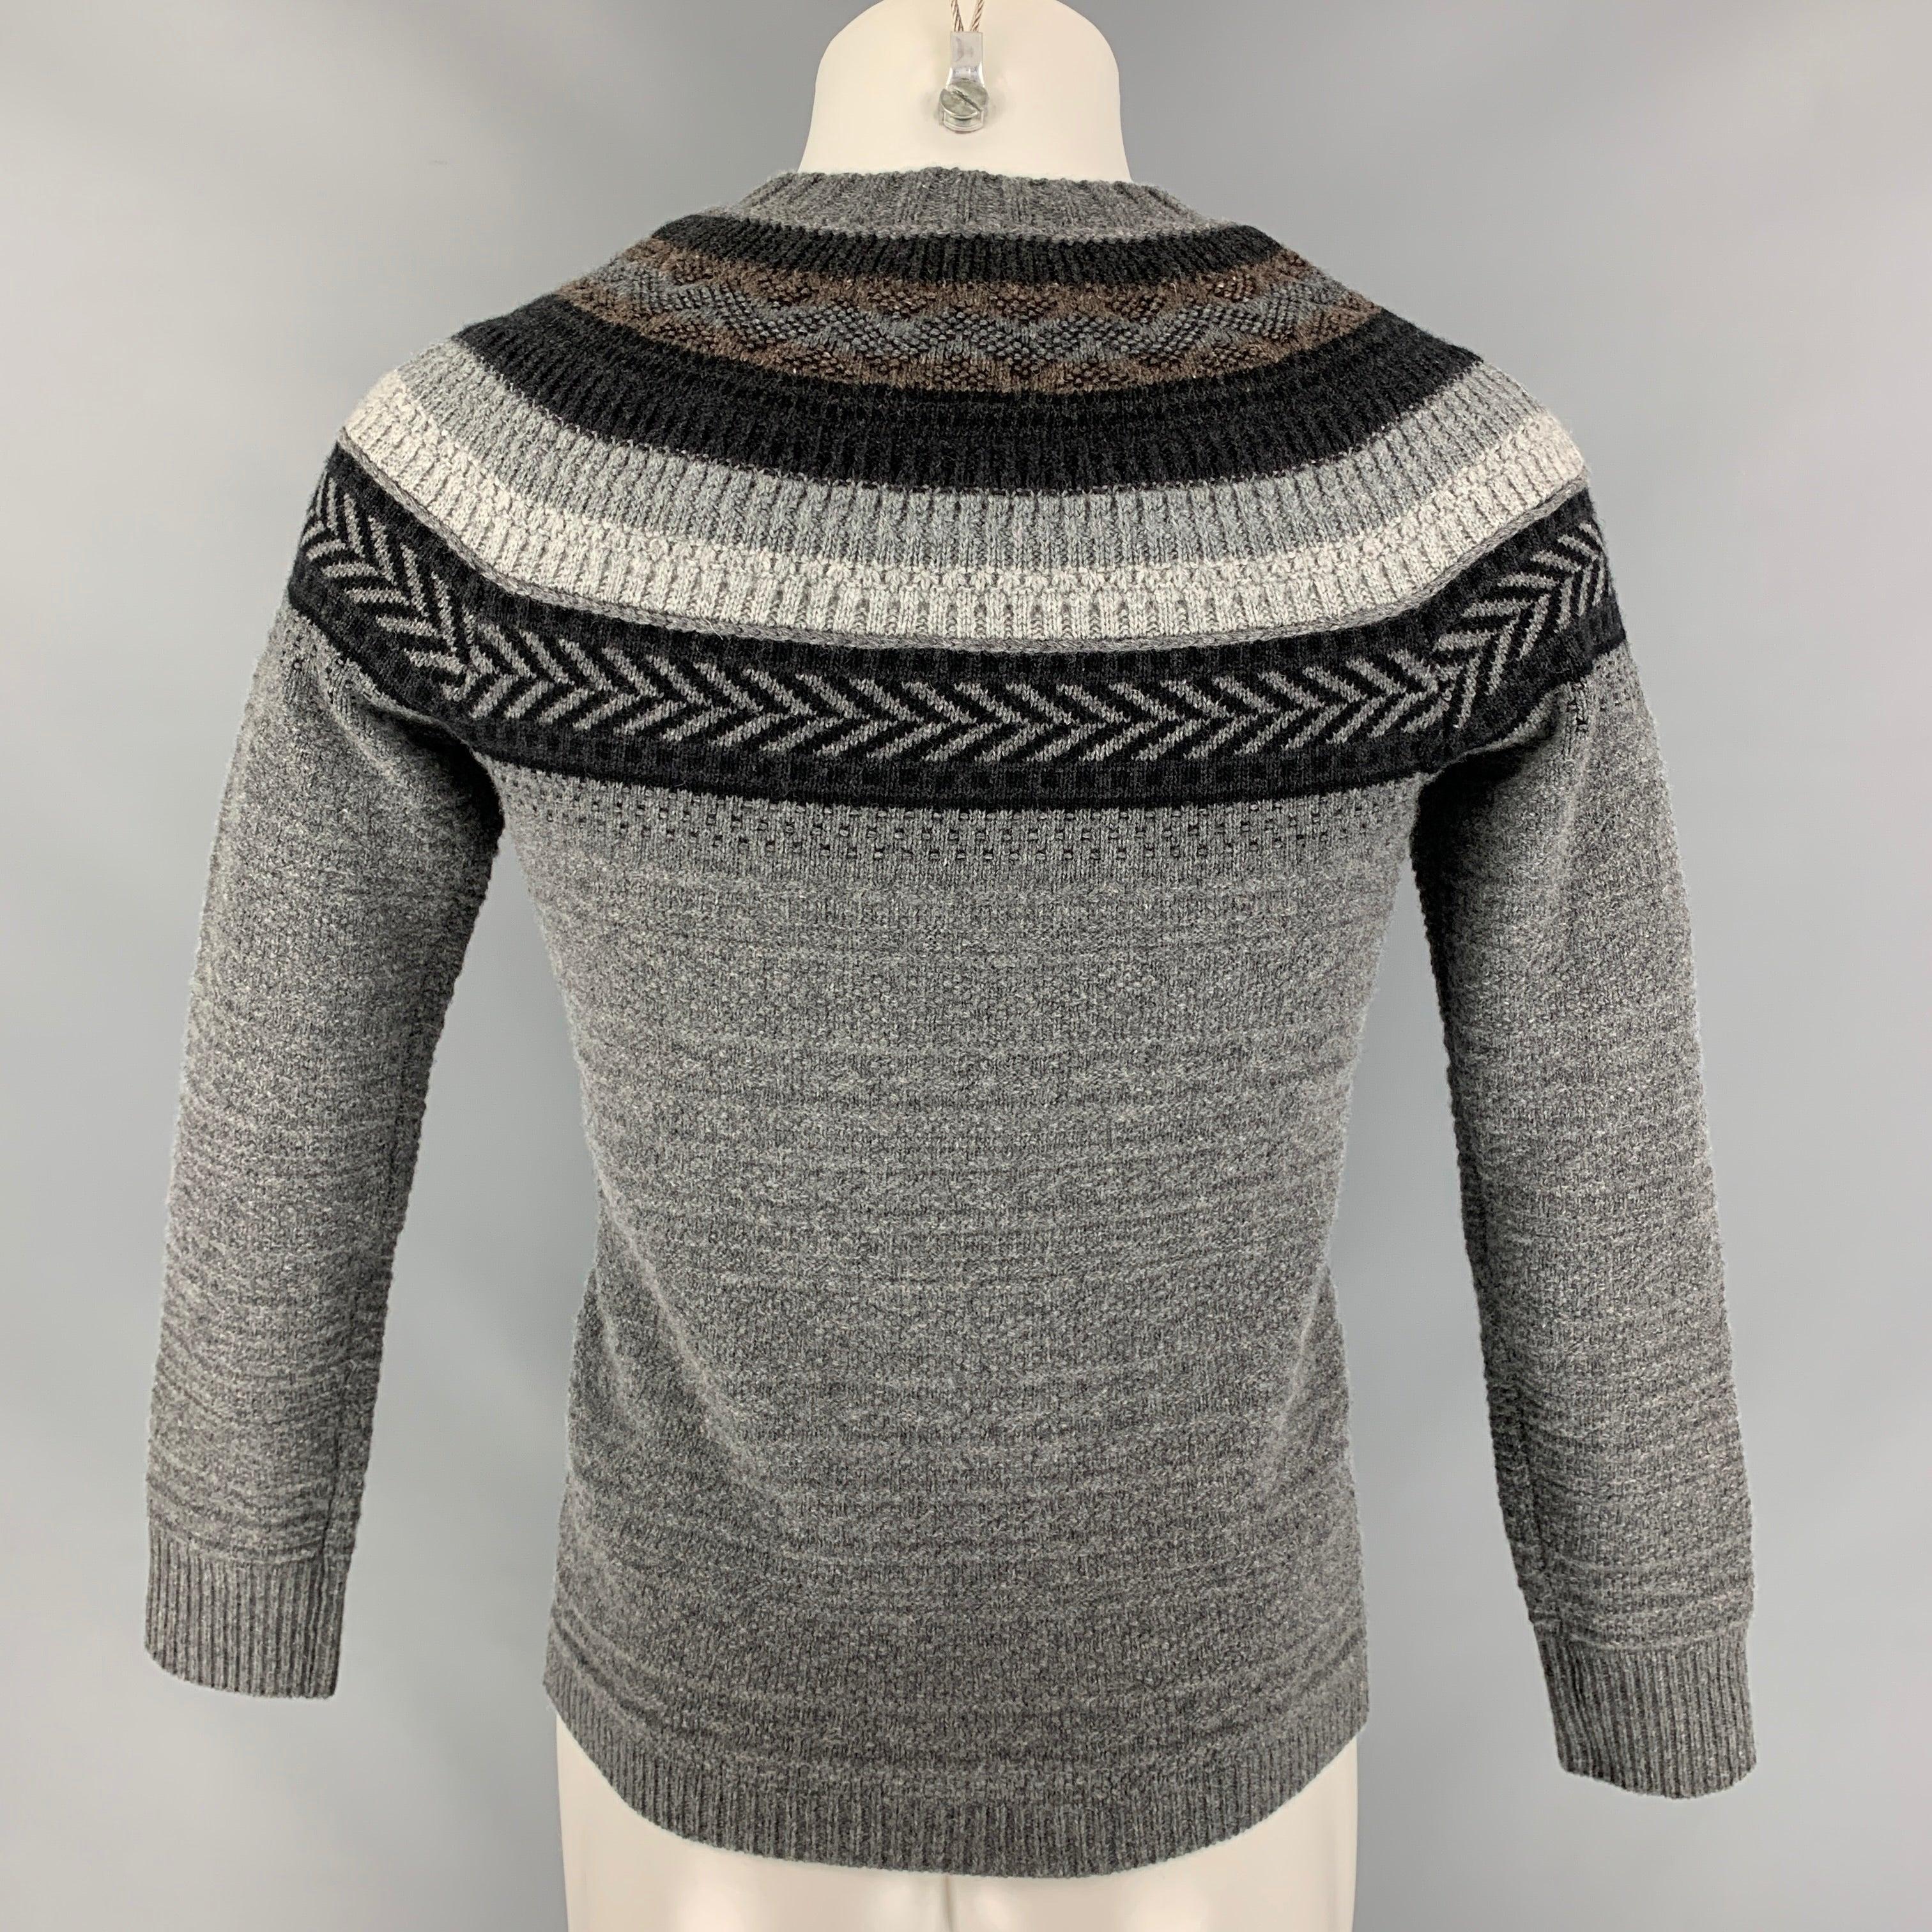 BURBERRY PRORSUM by Christopher Bailey Fairisle Lambswool / Cashmere Sweater 1